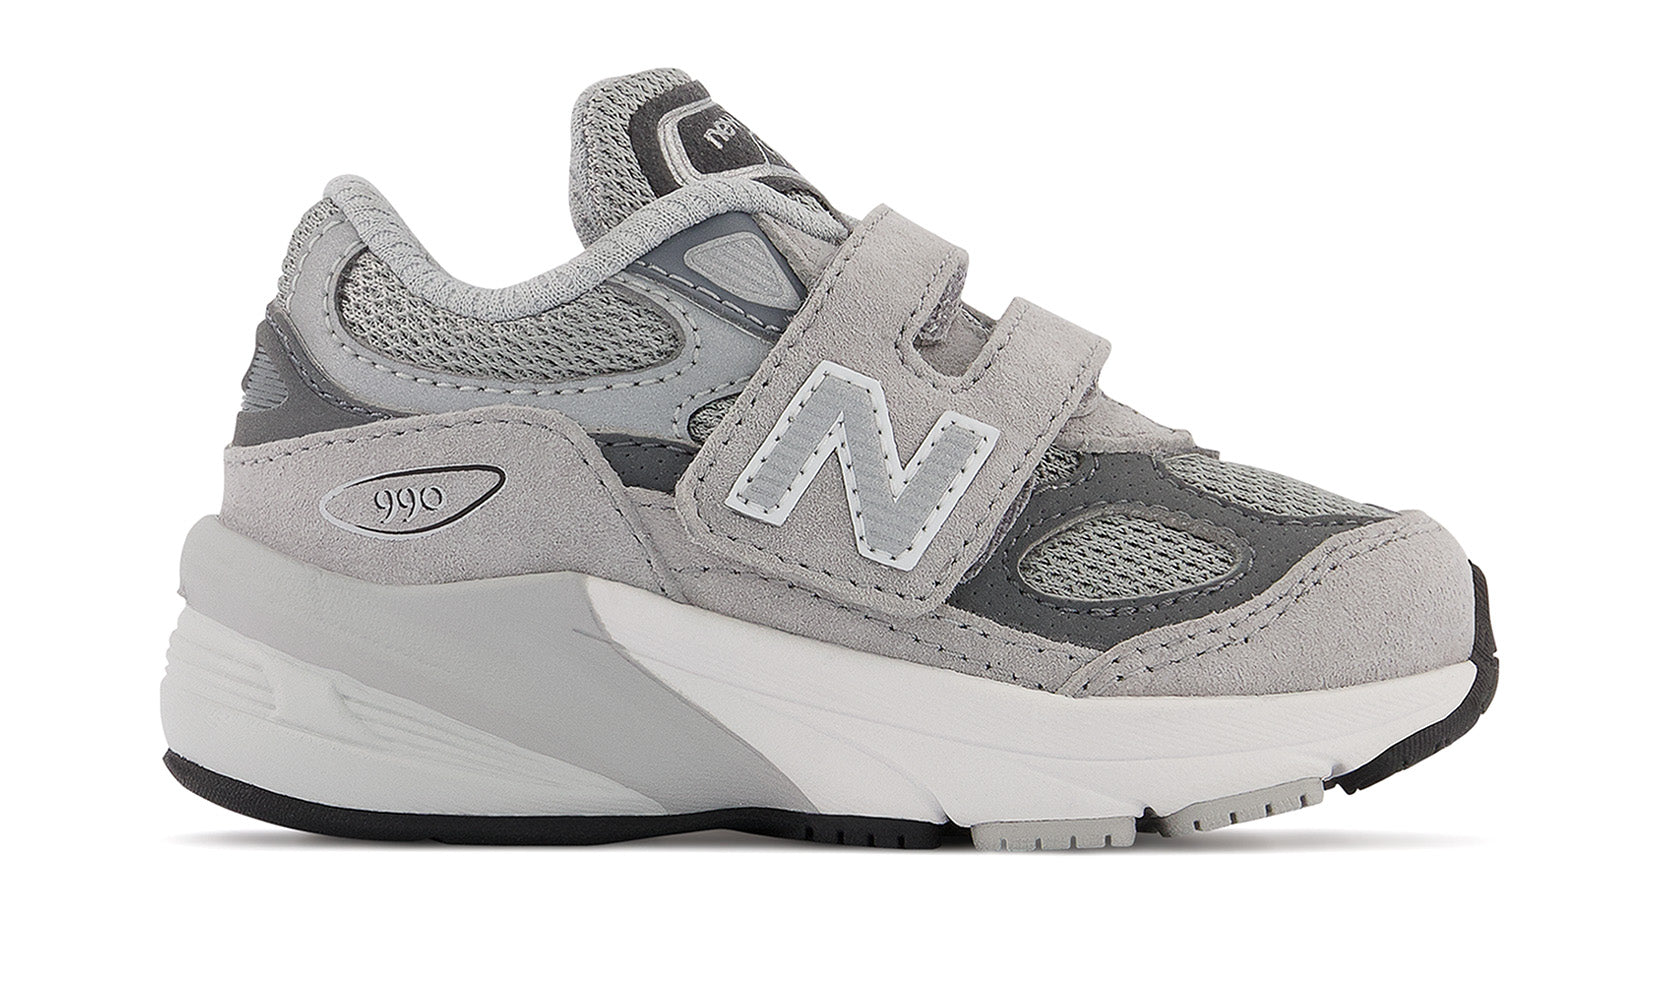 New Balance - 990v6 Hook and Loop Sneakers